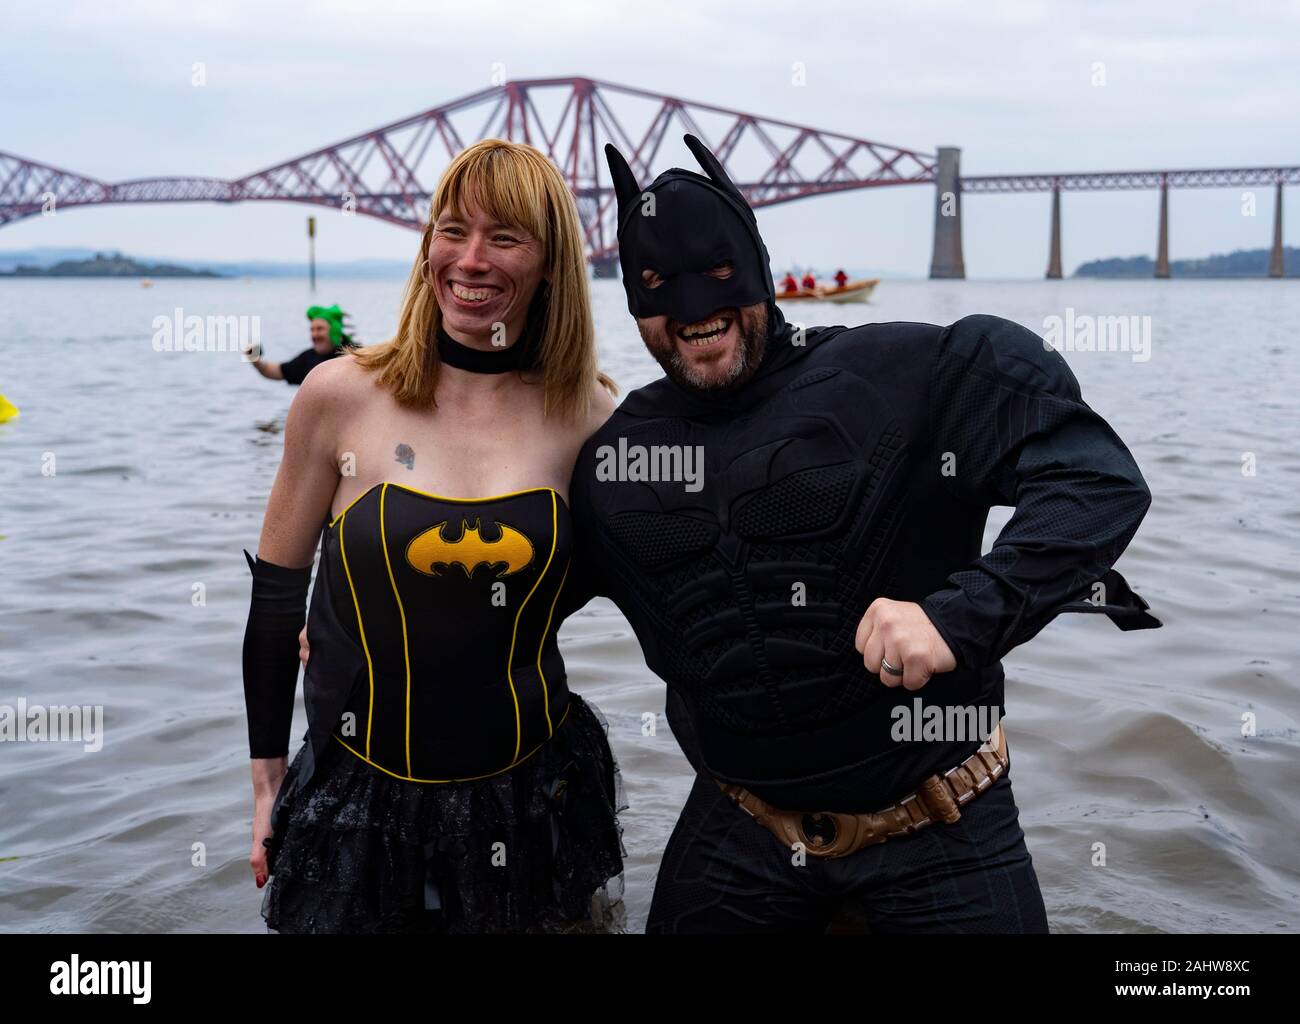 South Queensferry, Scotland, UK. 1st Jan 2020. People in fancy dress take the plunge into the Firth of Forth river during the annual New Year’s Day Loony Dook at South Queensferry. Iain Masterton/Alamy Live News Stock Photo